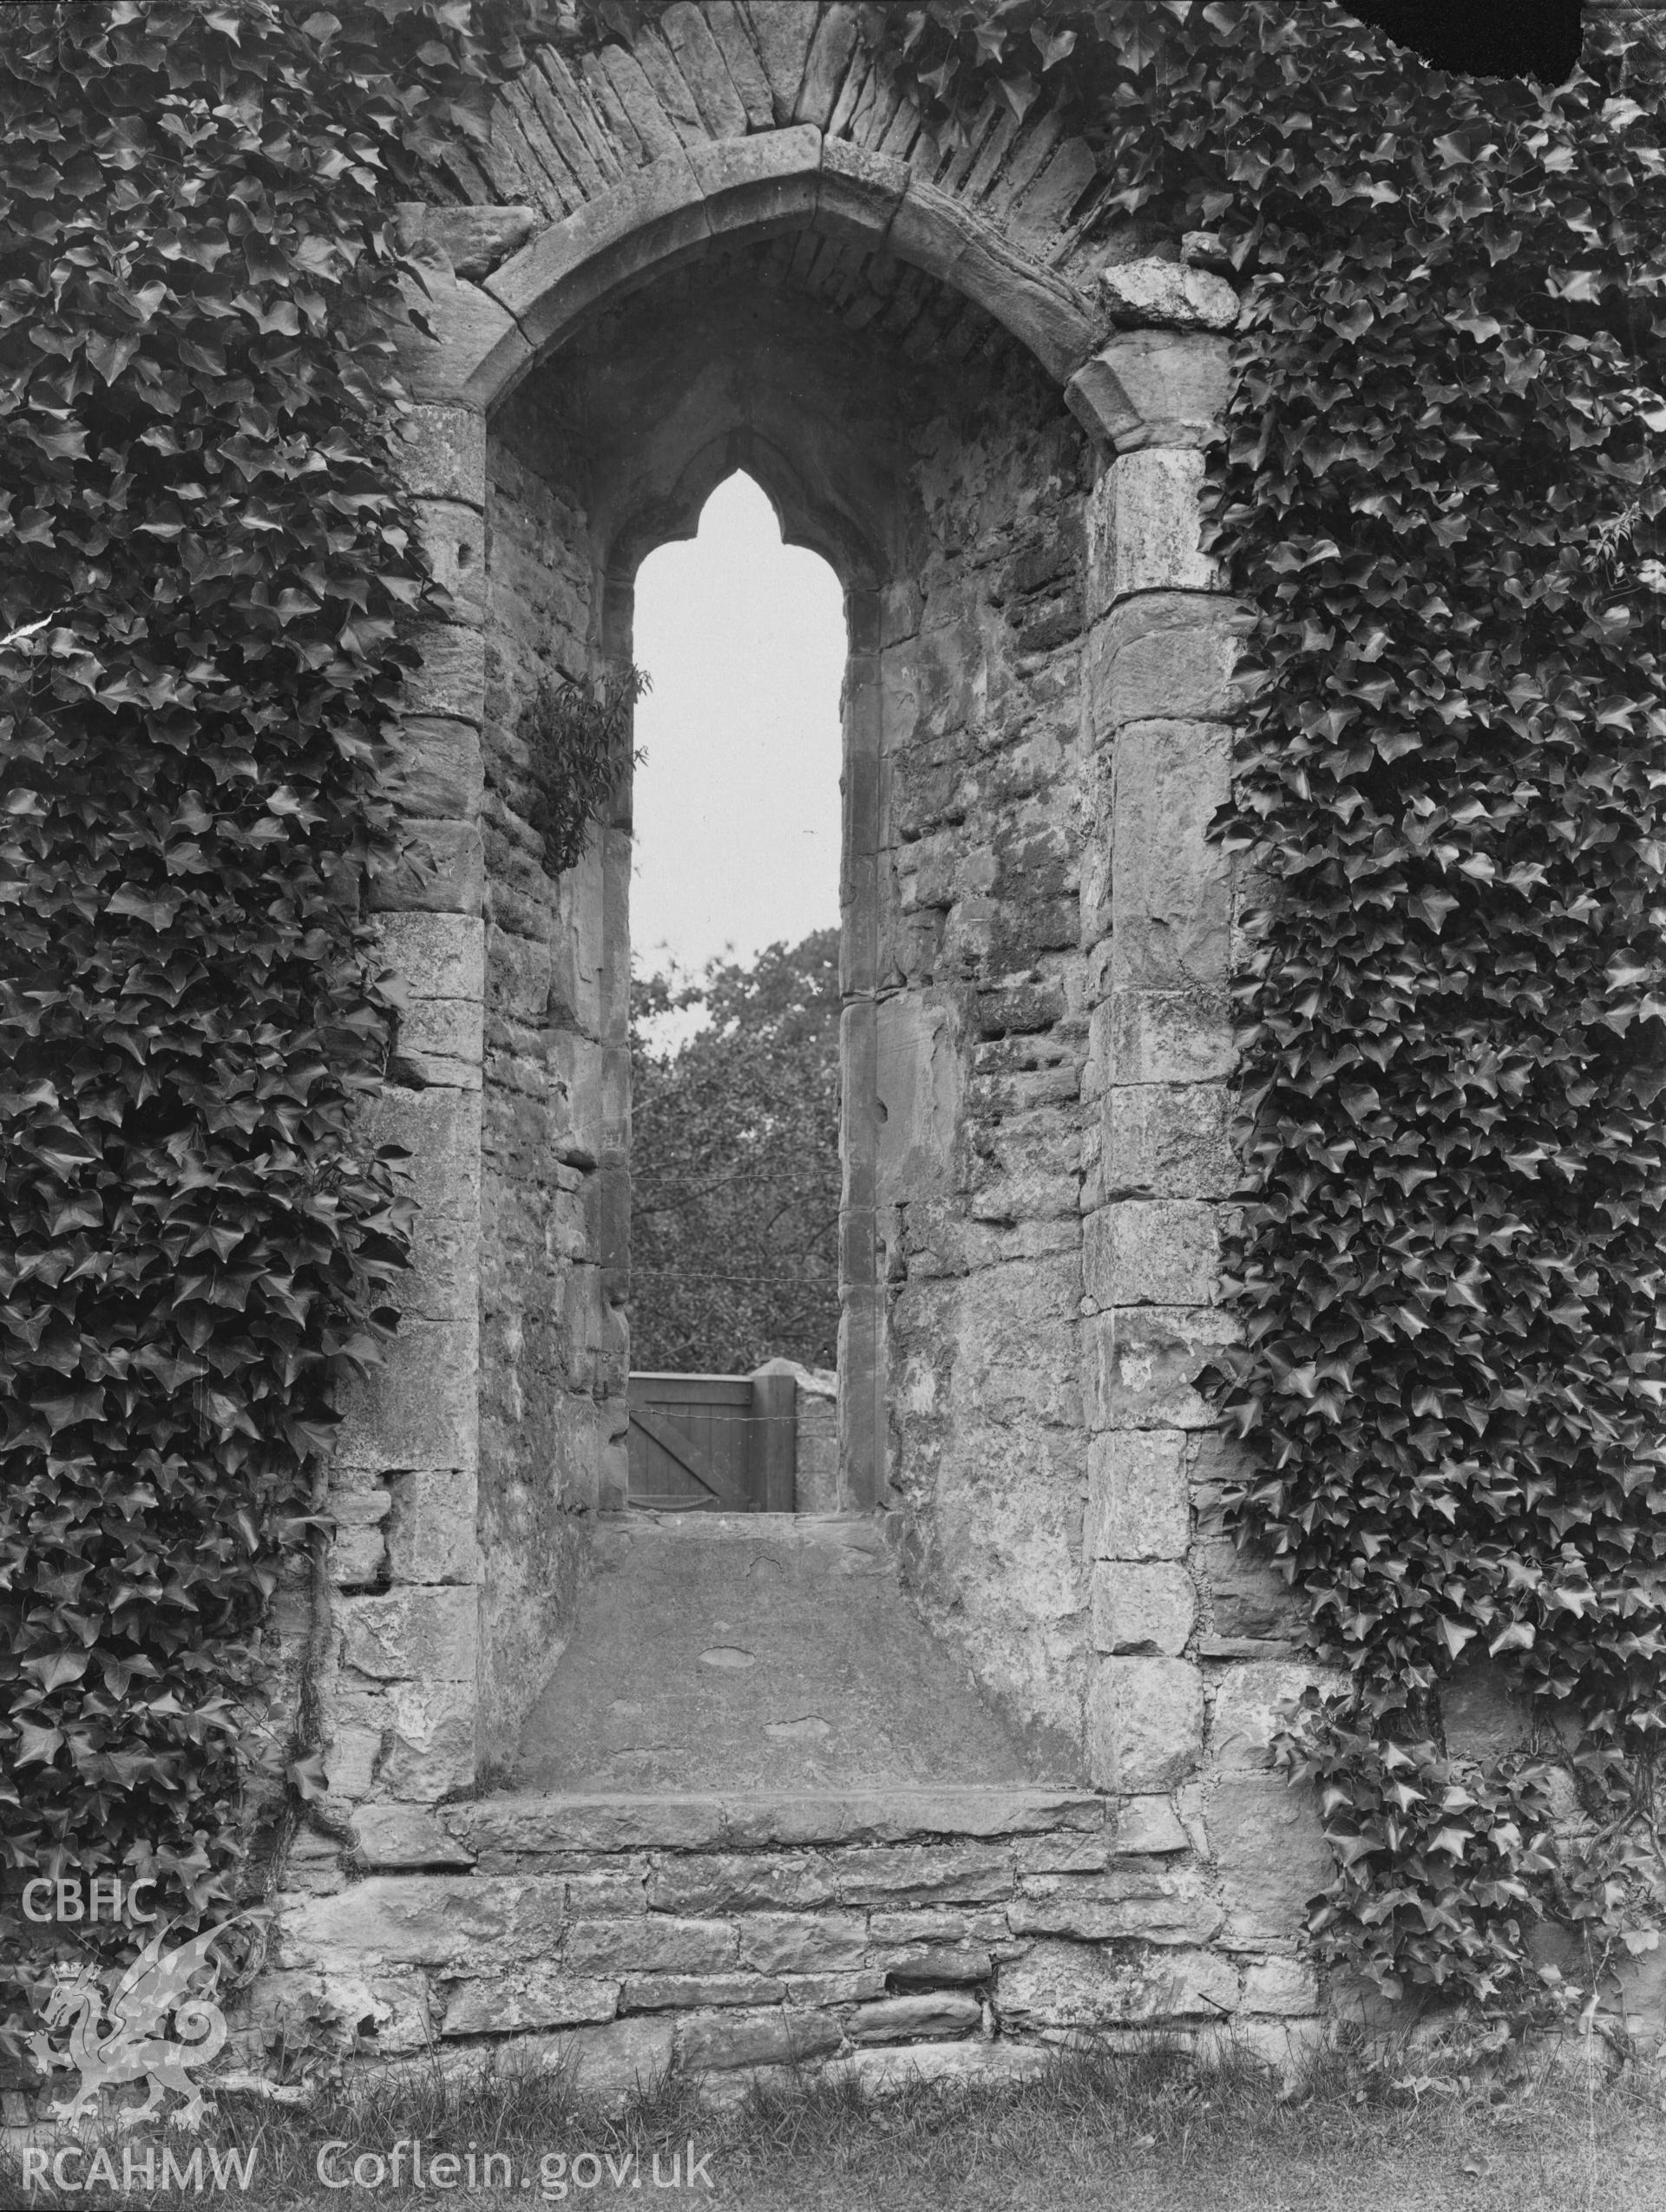 Digital copy of an early National Buildings Record photograph showing the west window at Tintern Abbey.